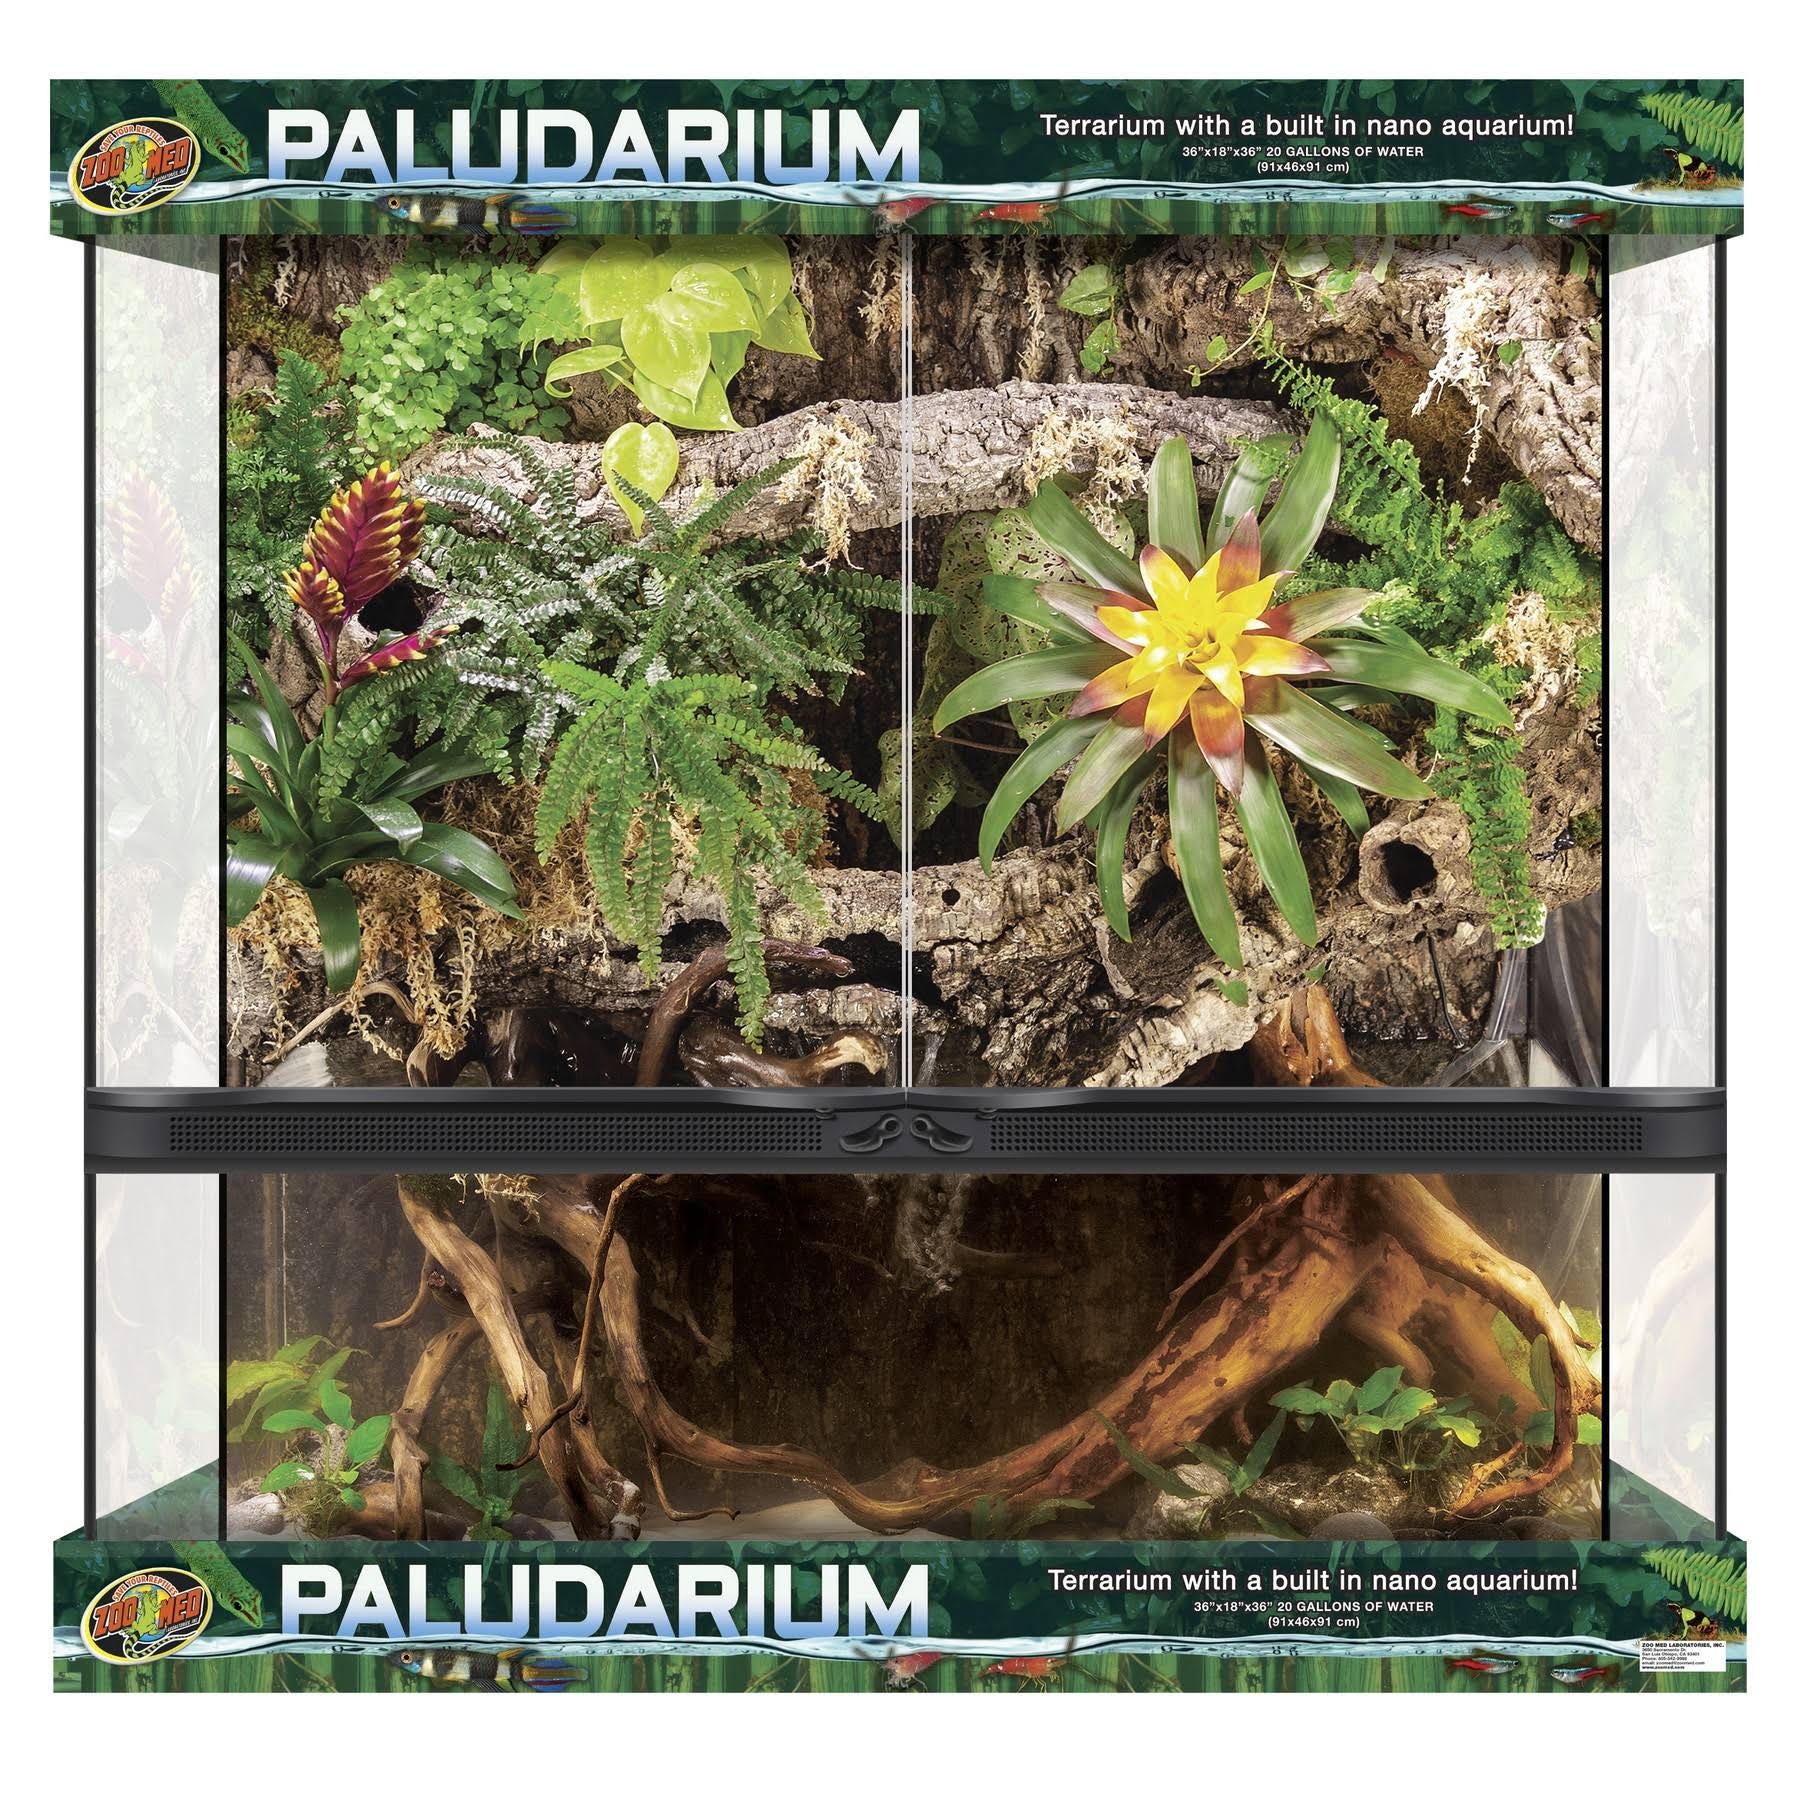 Versatile Zoo Med Glass Paludarium for Turtles and Aquatic Creatures - Stainless Steel Top, Snap Closures | Image